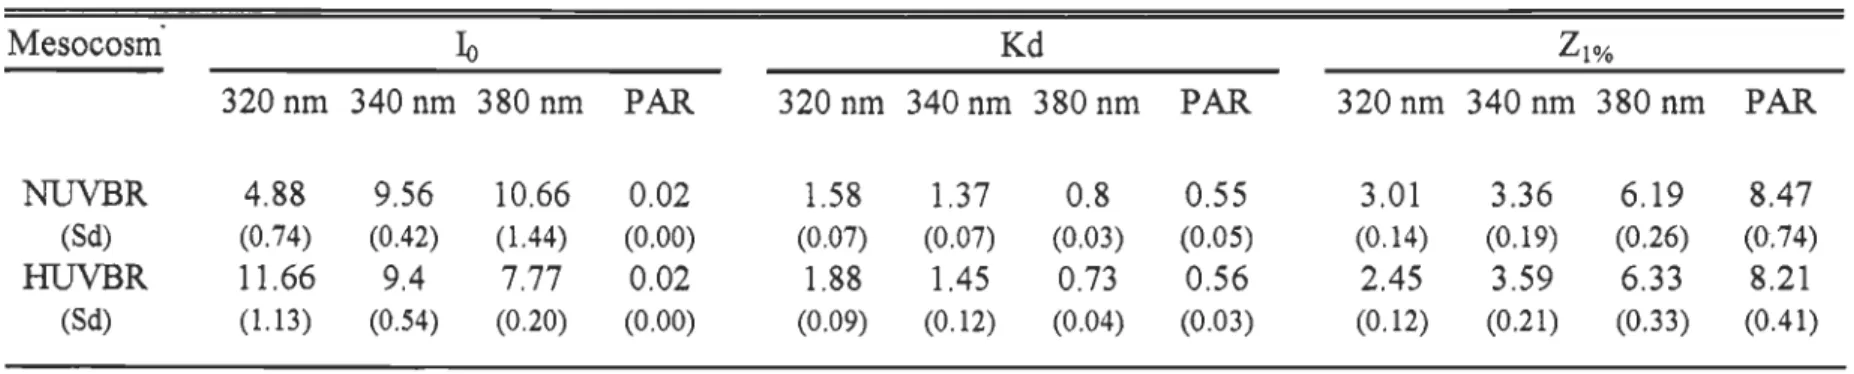 Table  1.  Daily irradiance just below the water surface  (10,  ilE cm- 2  fI  for PAR, and  kJ  m- 2  nm- I  d- I  for UV irradiance),  vertical  attenuation  coefficient  (Kd,  m- I)  and  mean  depth  of  1  %  Iight  penetration  (ZI%,  m),  measured  